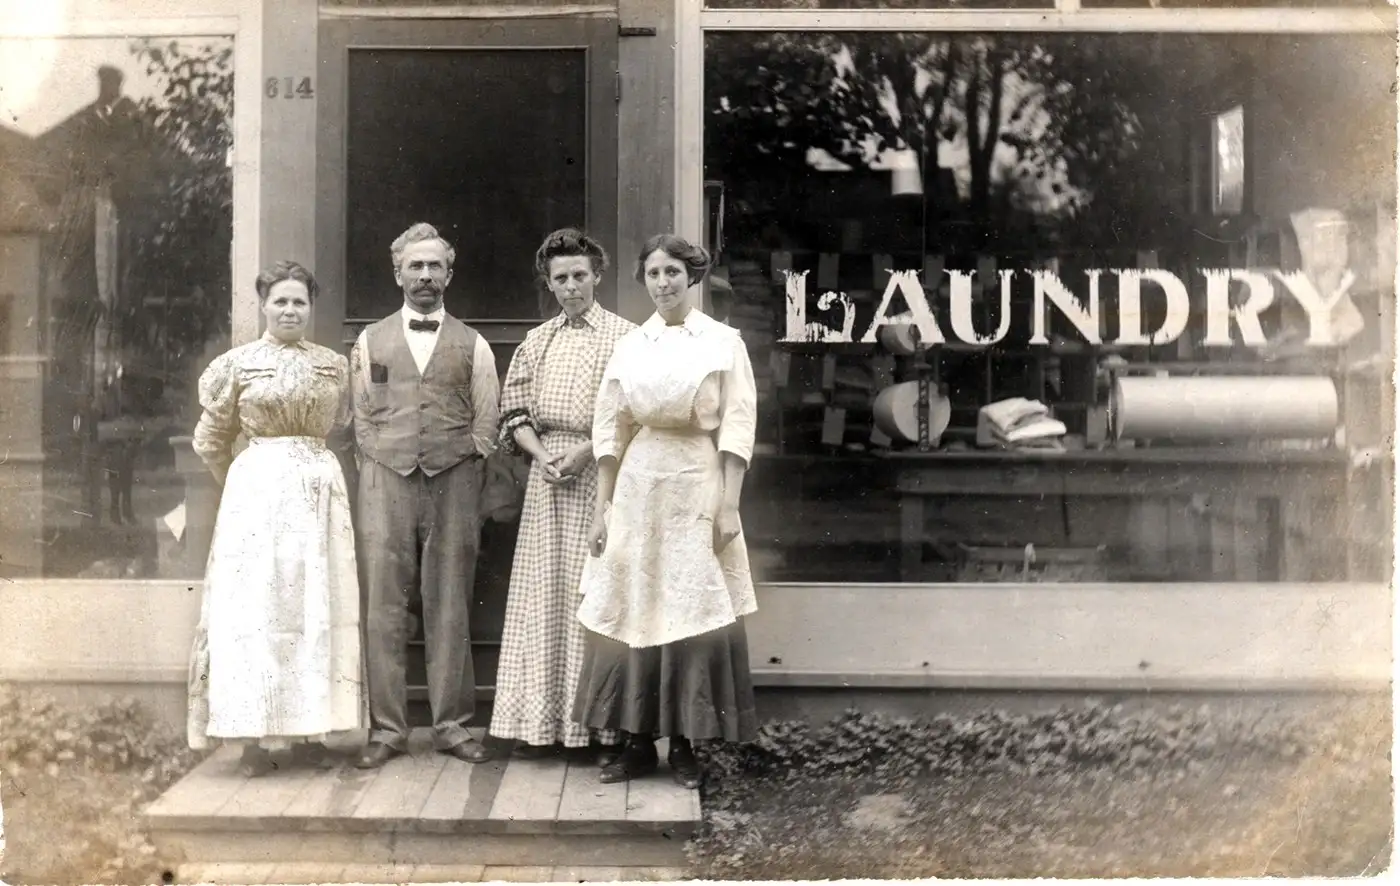 Before automatic washers, steam laundries relieved drudgery